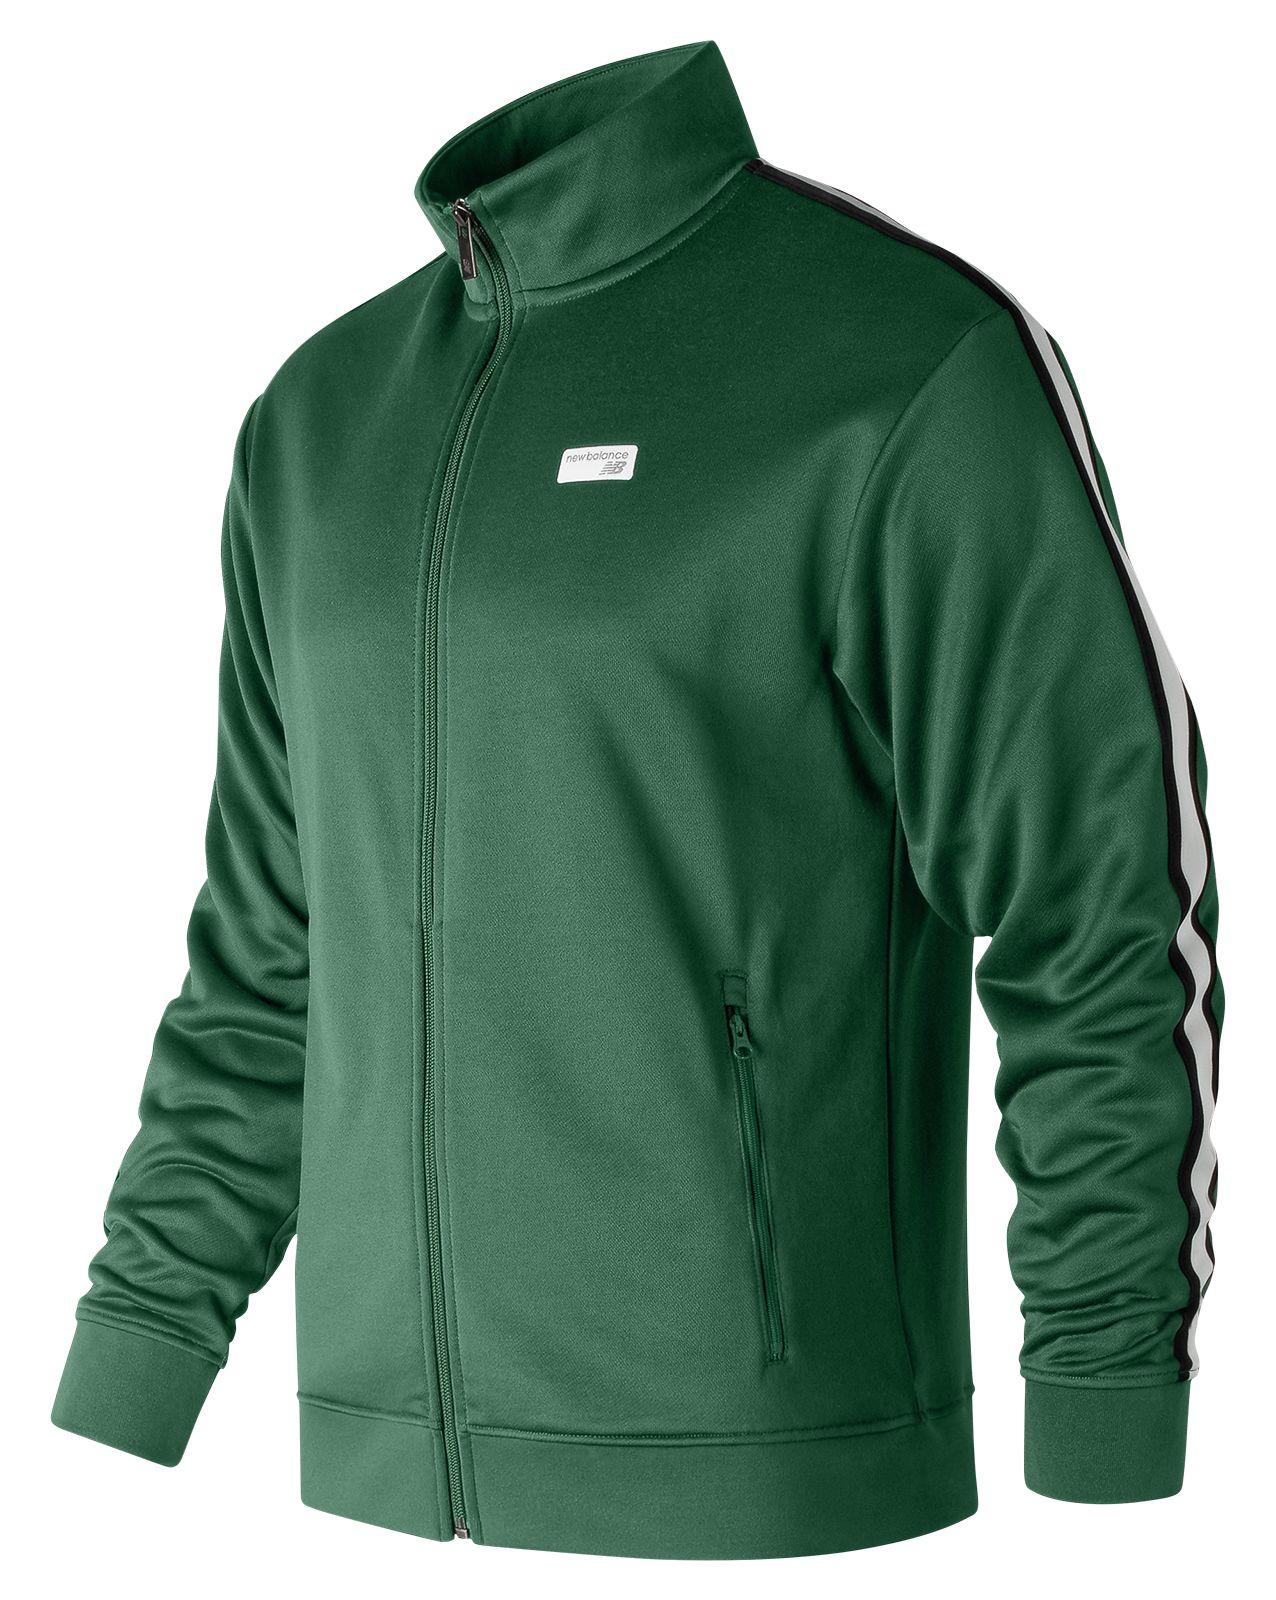 New Balance Cotton Nb Athletics Track Jacket in Green for Men - Lyst